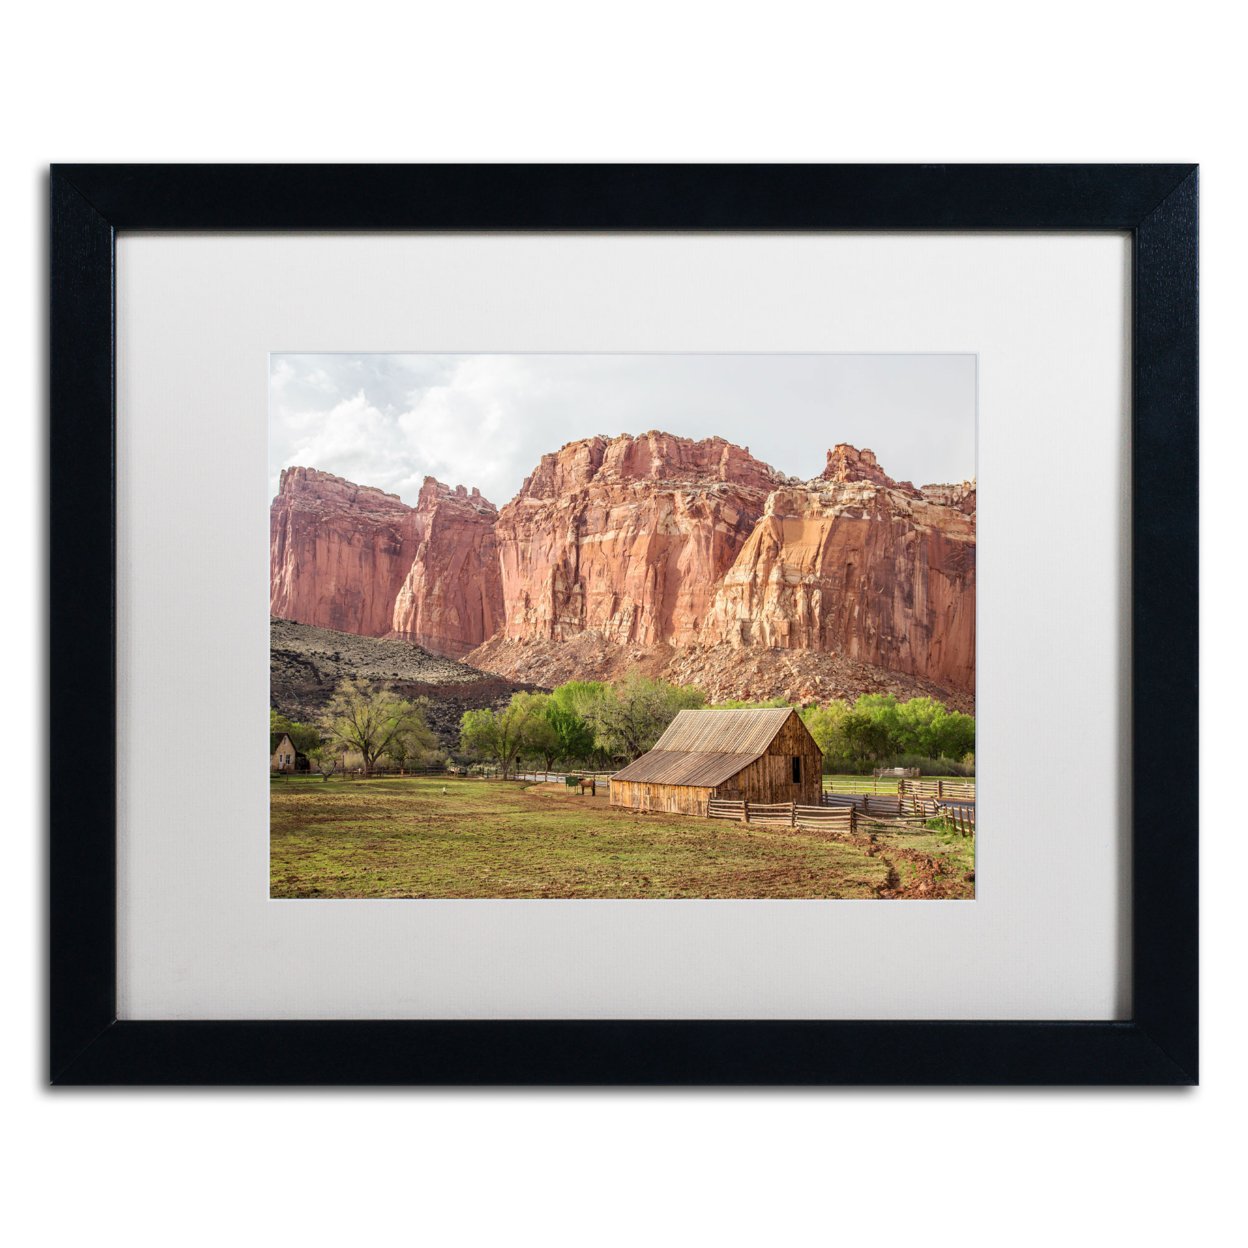 Pierre Leclerc 'Capitol Reef Scenic' Black Wooden Framed Art 18 X 22 Inches